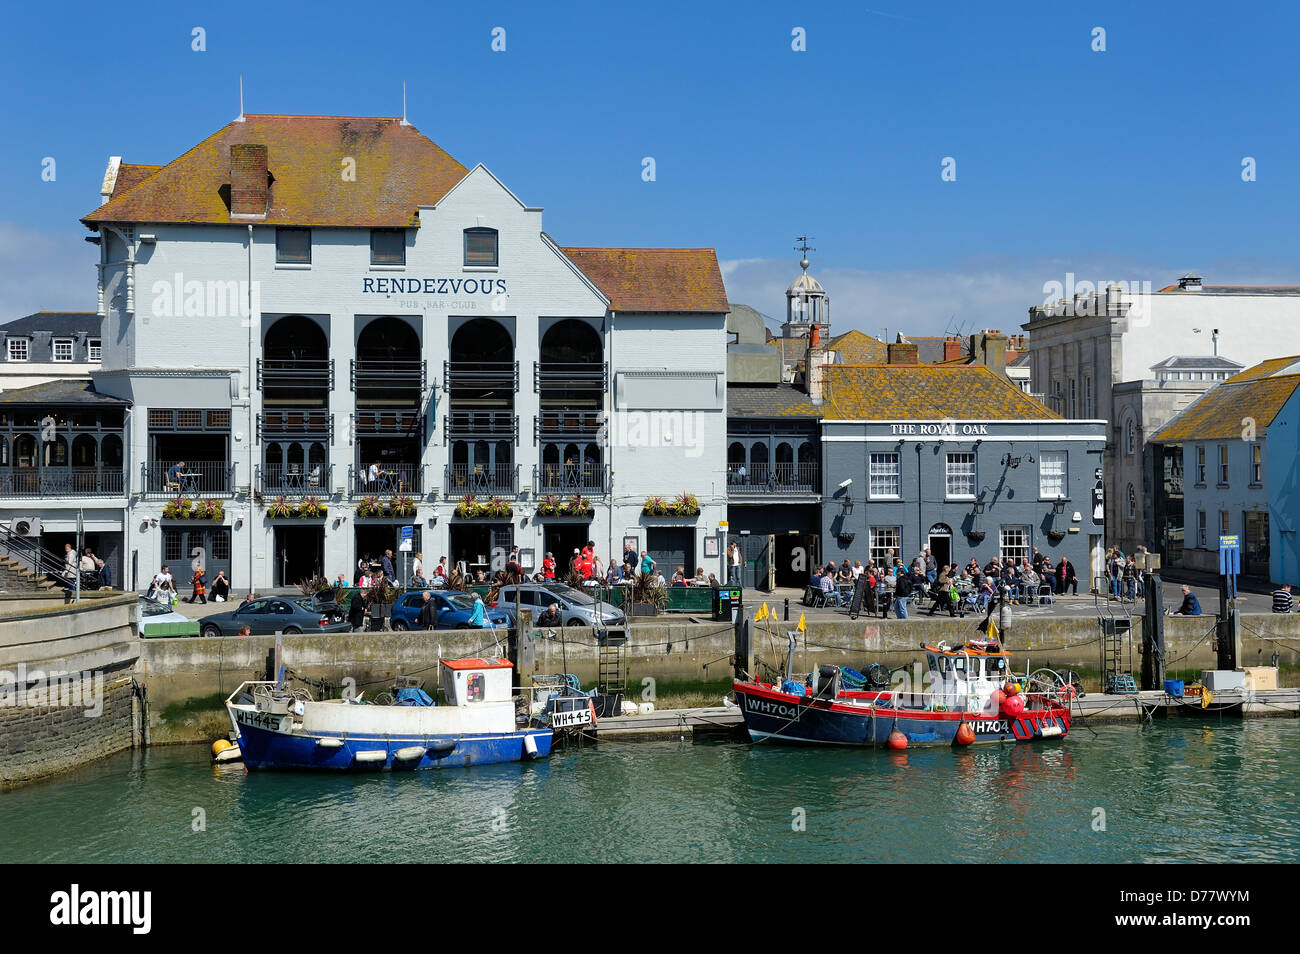 The rendezvous pub bar and club on a busy afternoon weymouth dorset england uk Stock Photo